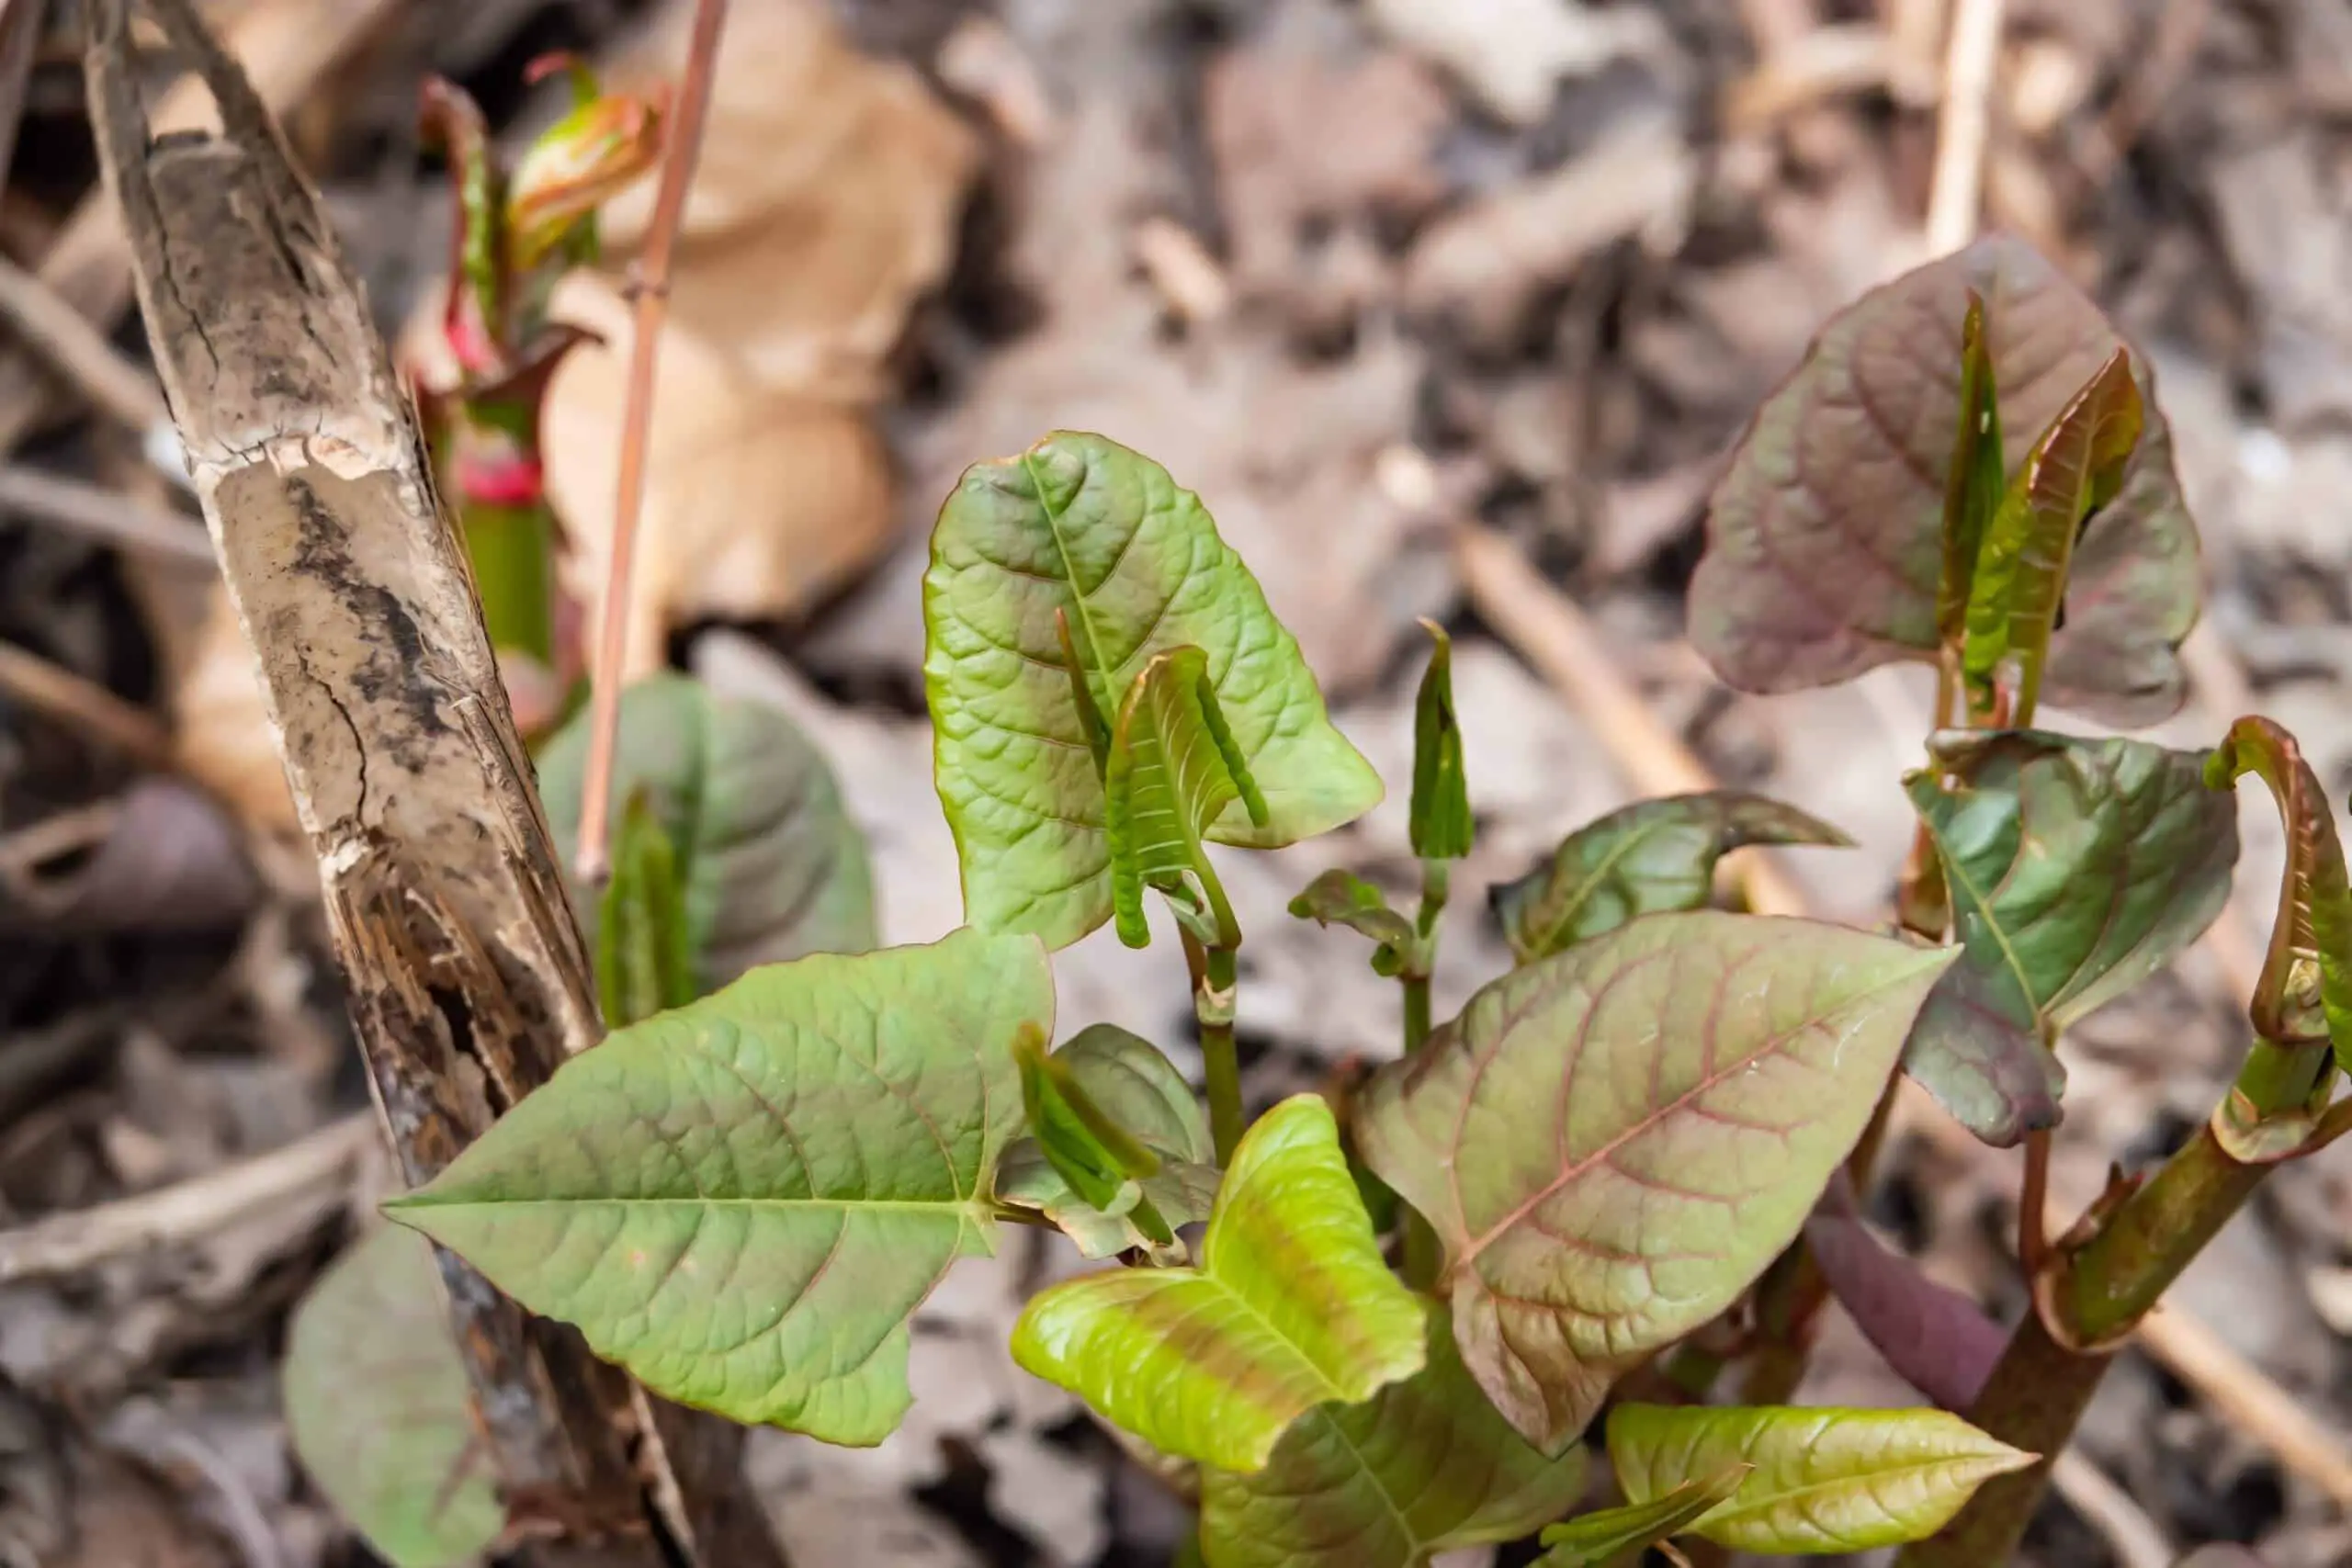 Early growth of Japanese knotweed in spring with new shoots and leaves growing